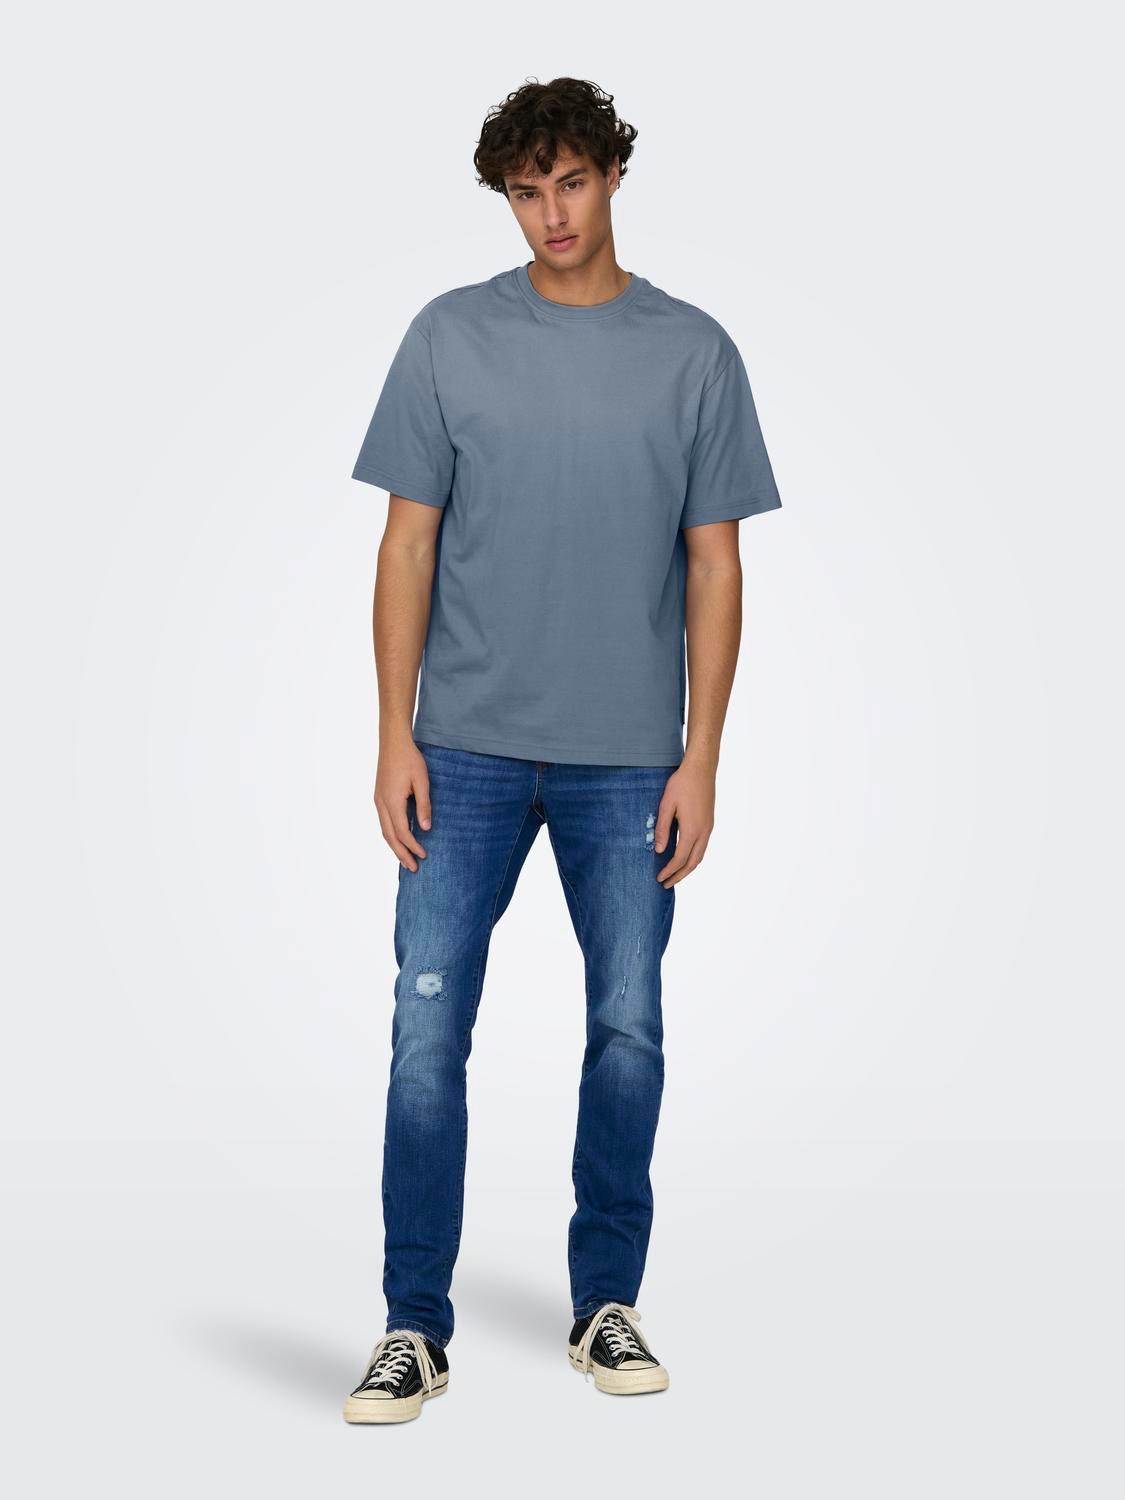 ONLY & SONS Oversized o-hals t-shirt -Flint Stone - 22022532